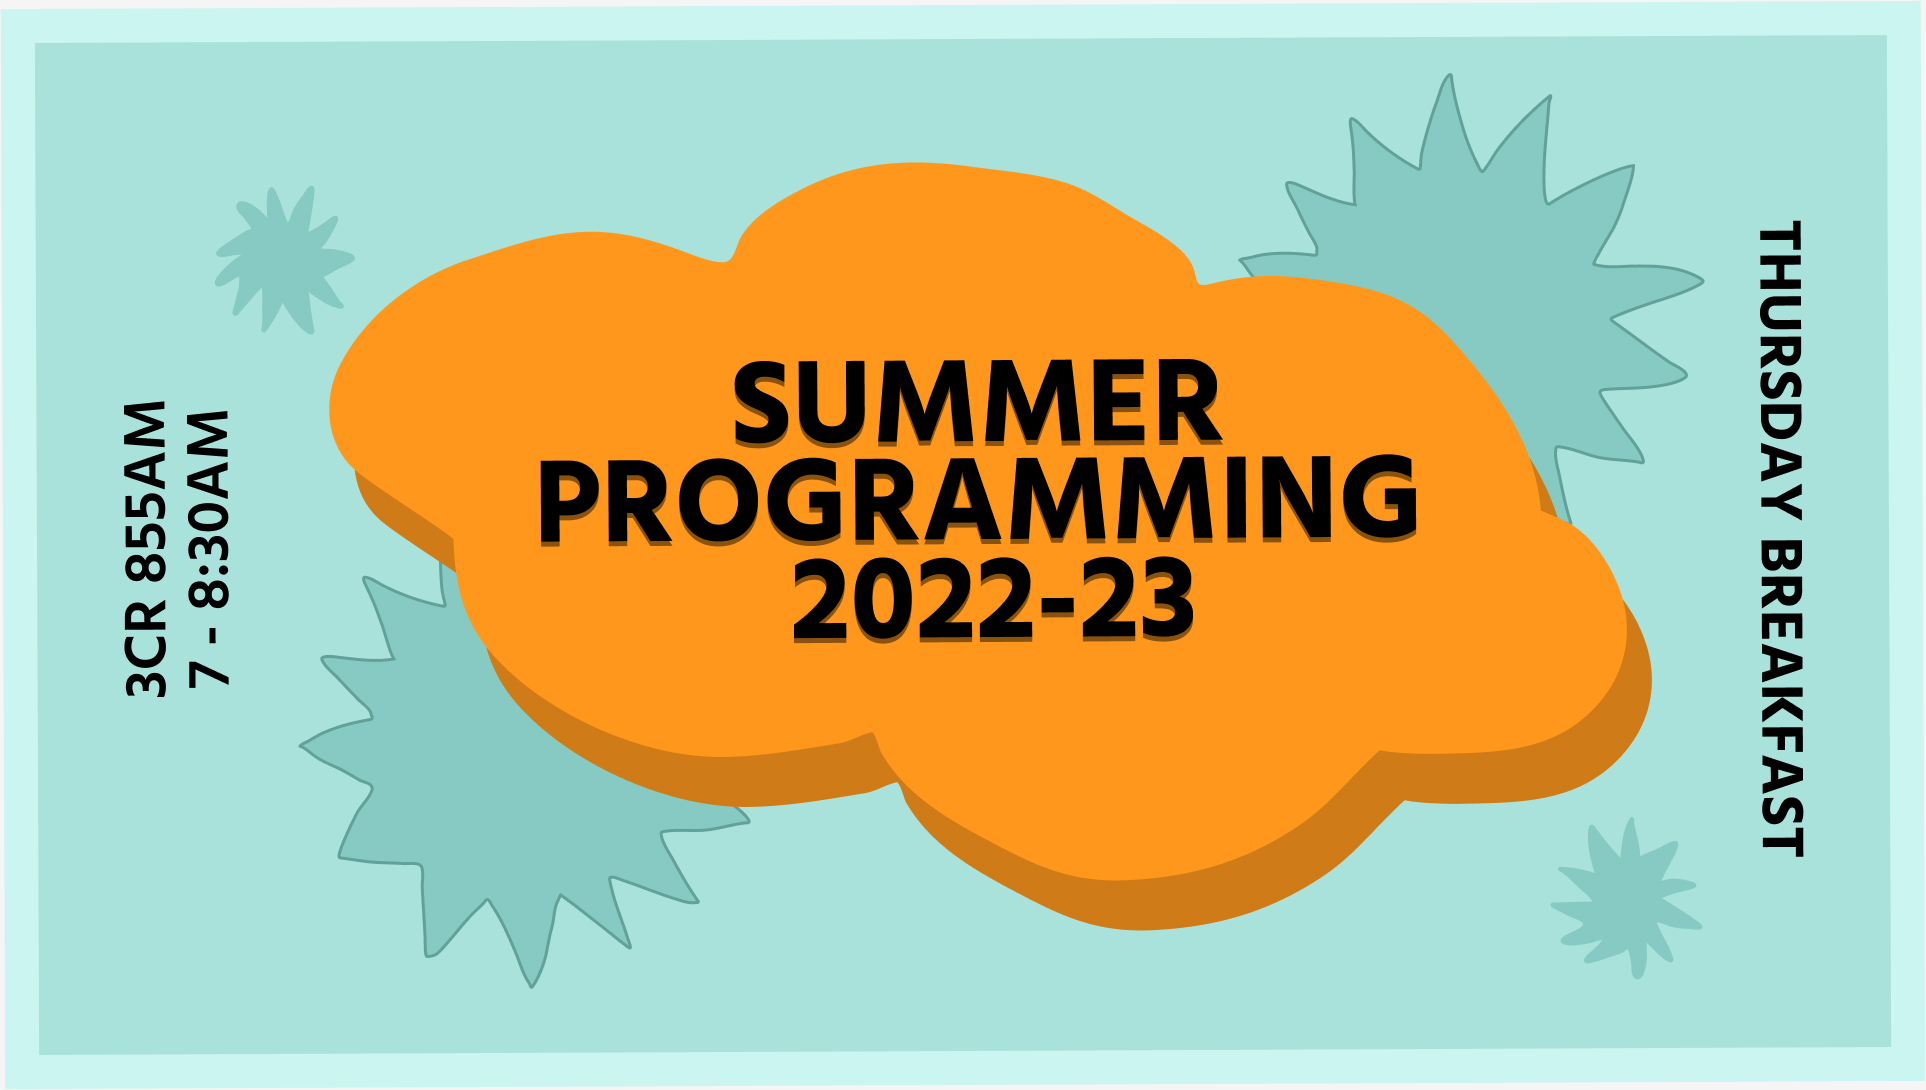 A digital illustration of an orange cloud floating on a blue back ground. Black letters across the cloud read "SUMMER PROGRAMMING 2022-23".  